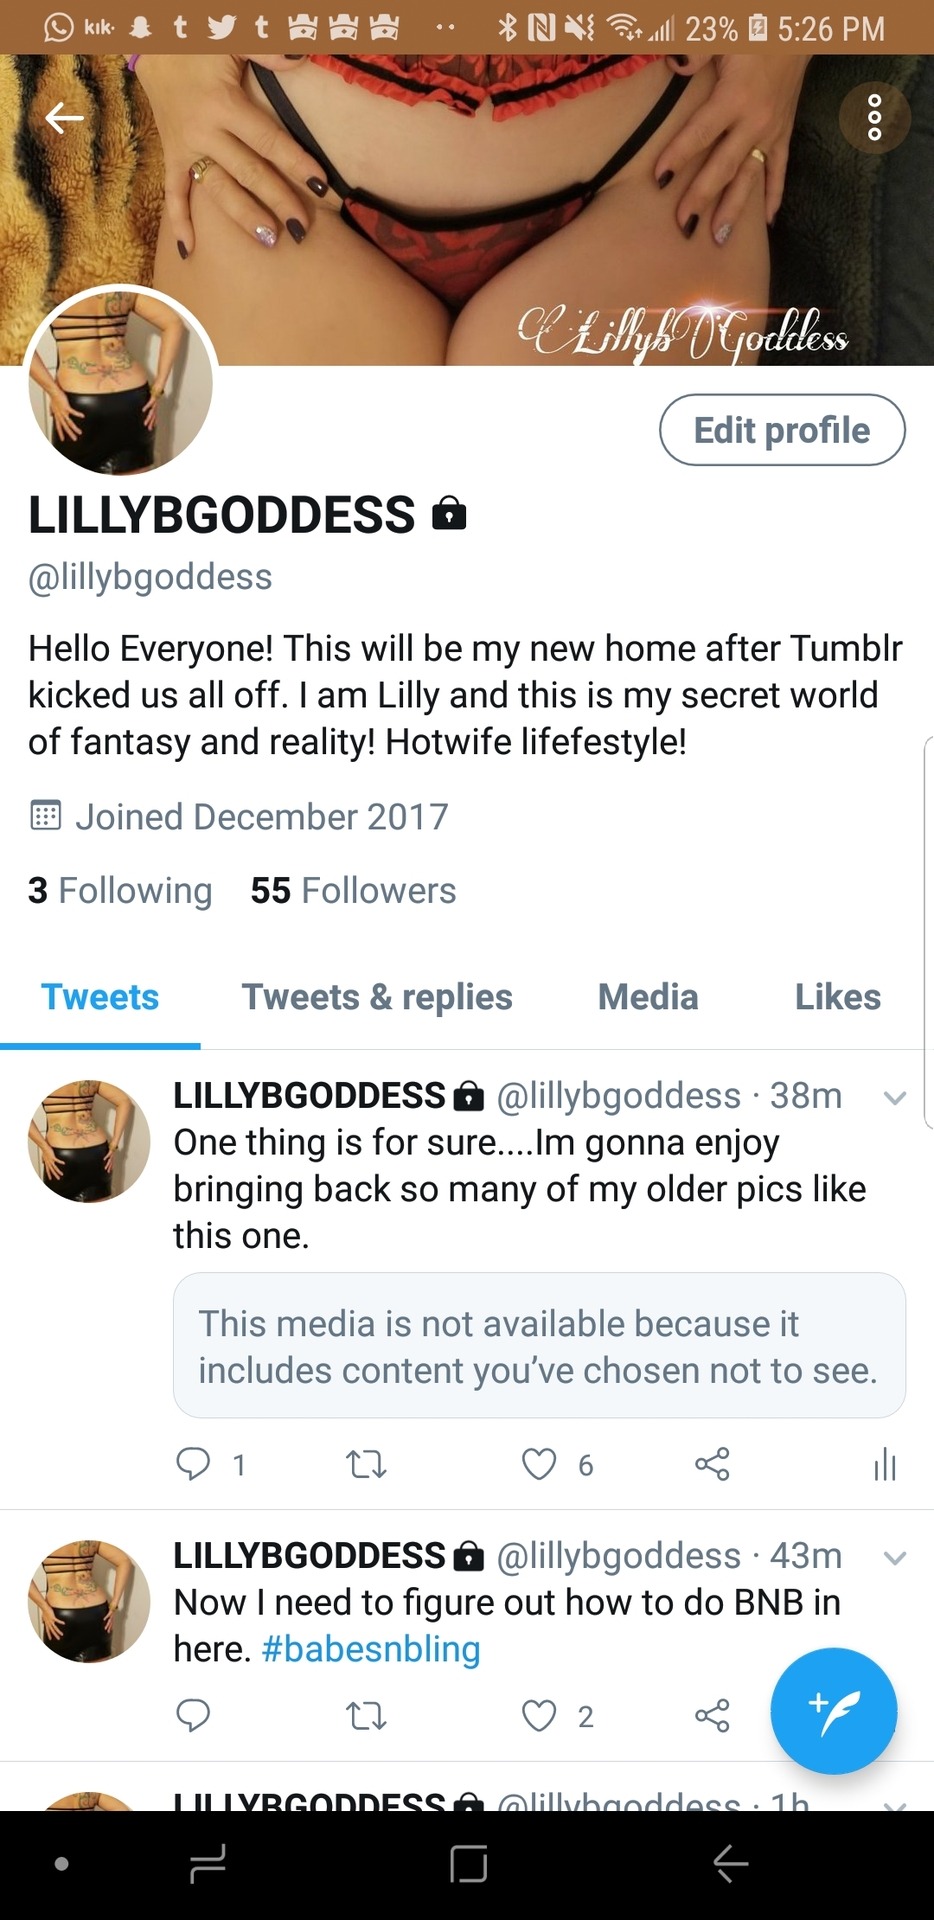 lillybgoddess: My new home. Come follow me! Check out LILLYBGODDESS LILLYBGODDESS